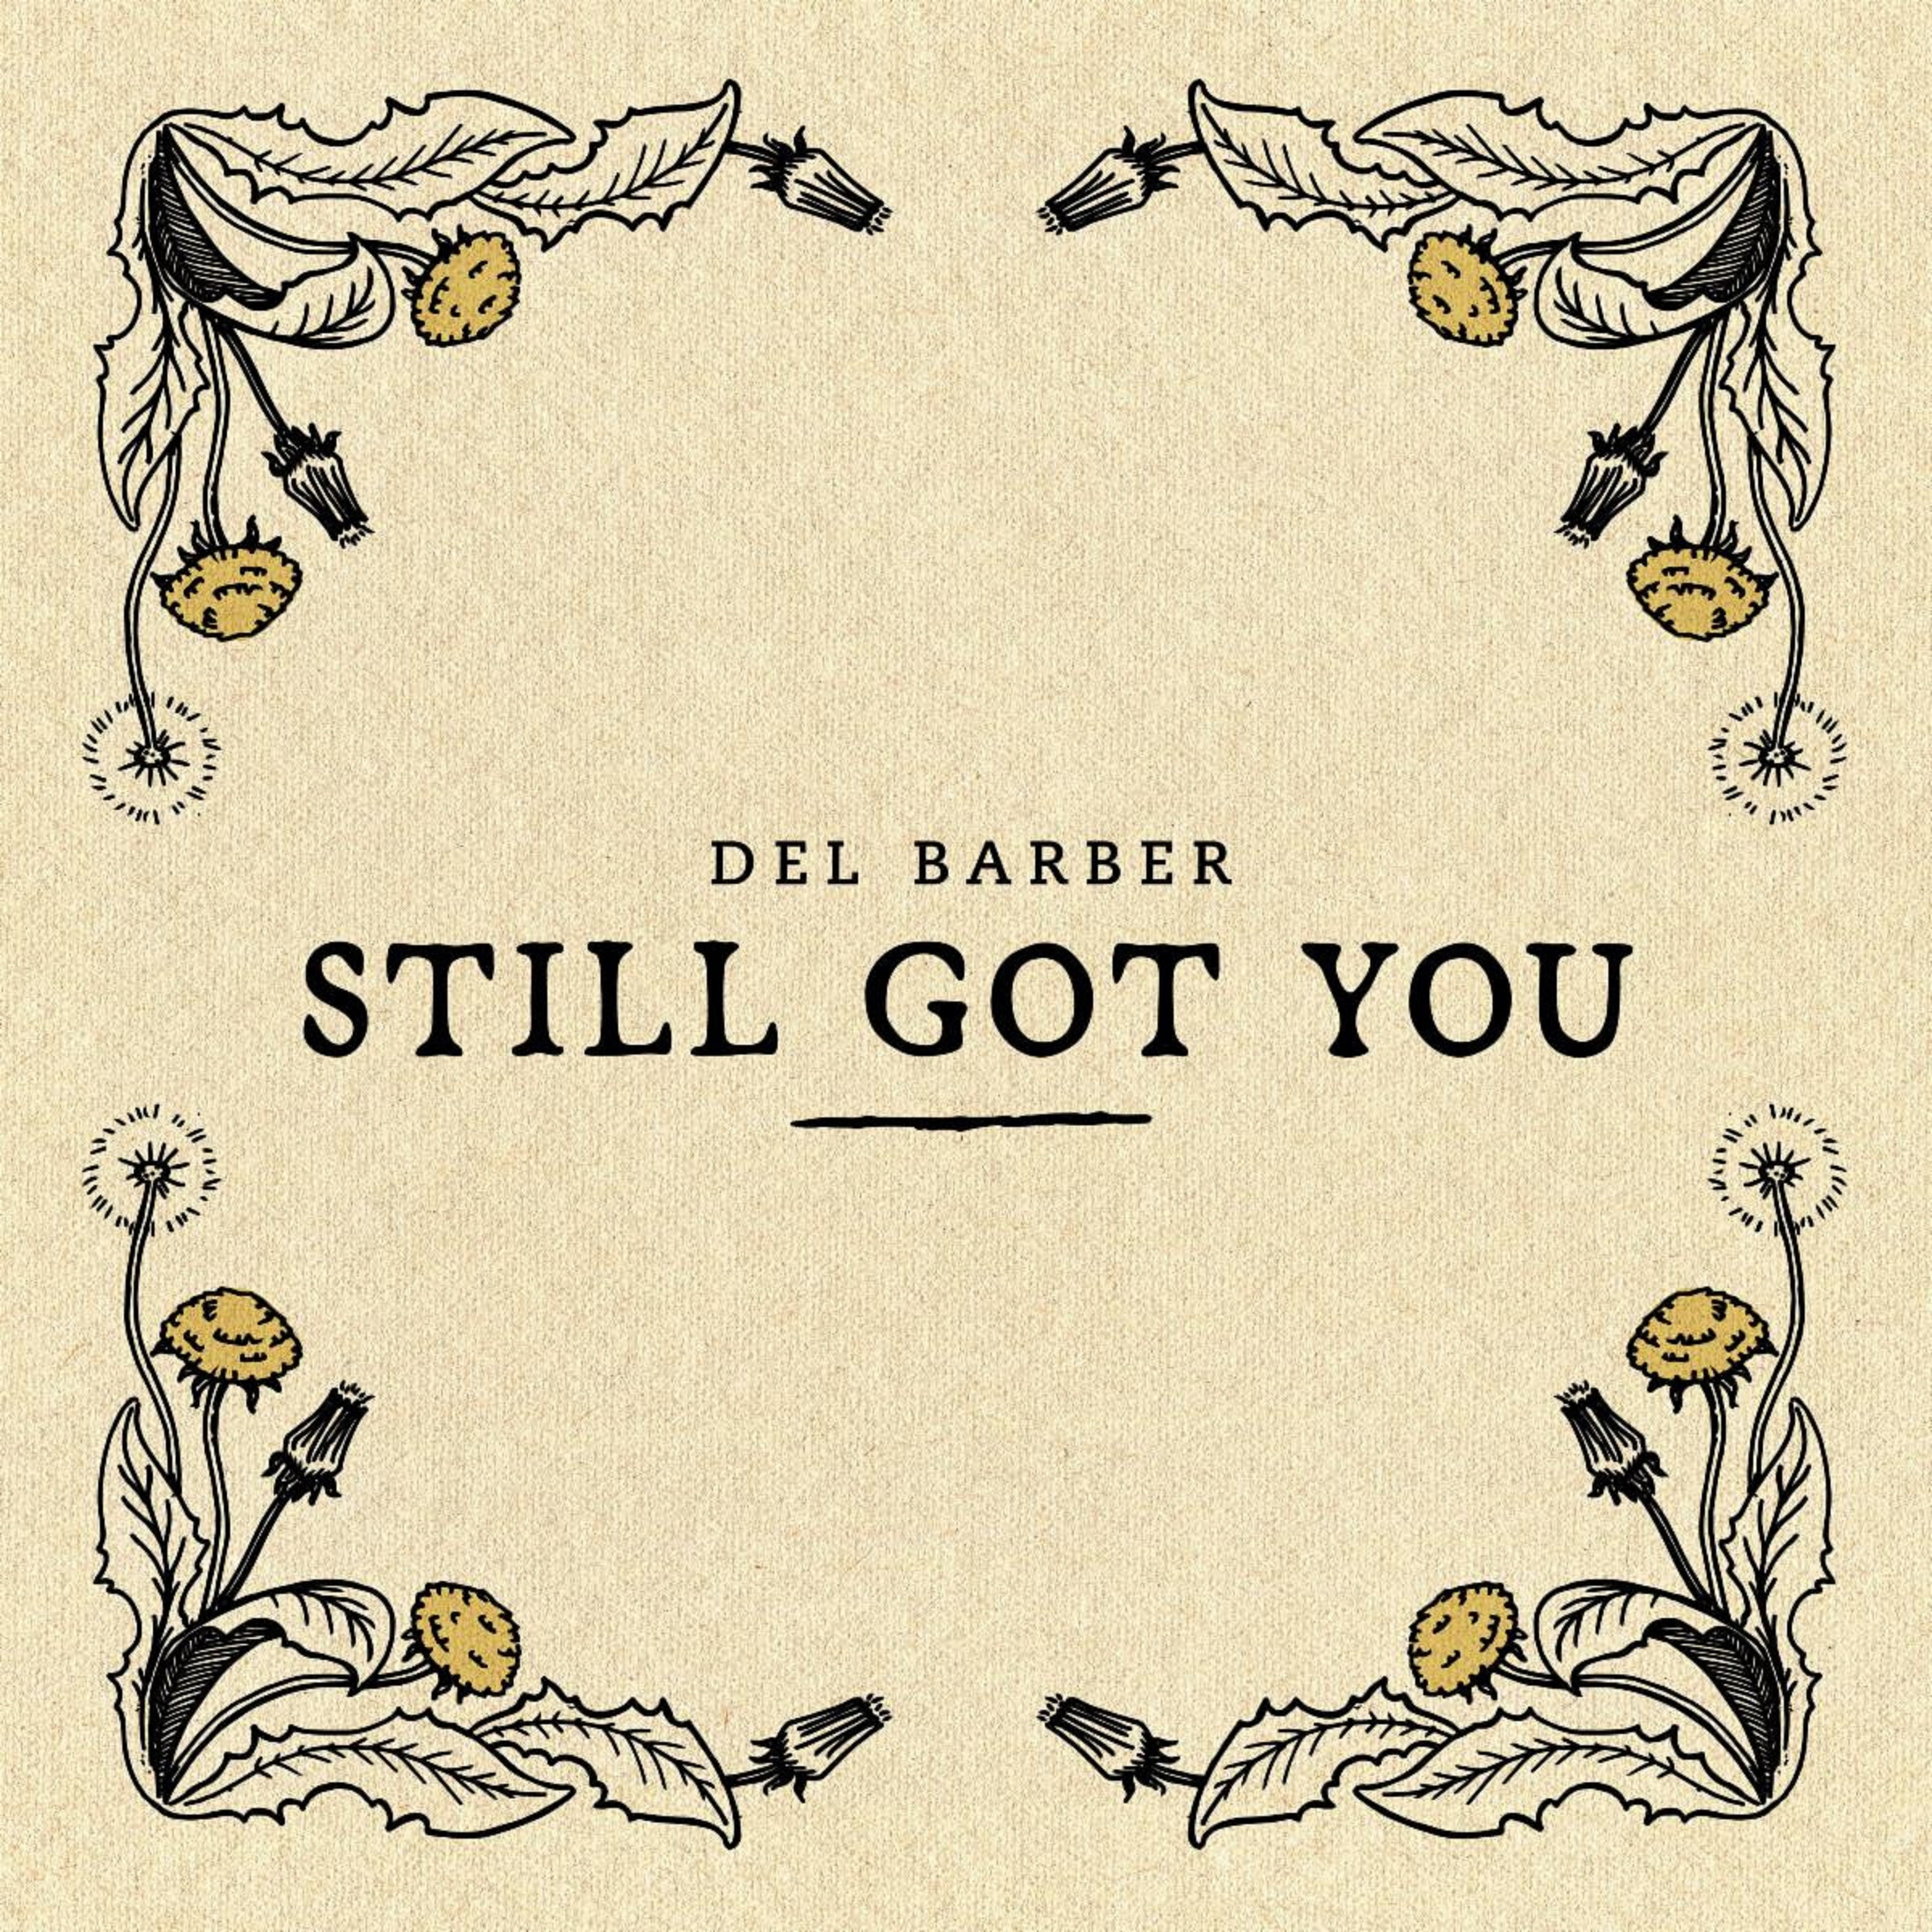 Del Barber Reflects On His Peaceful Corner Of The World With “Still Got You”